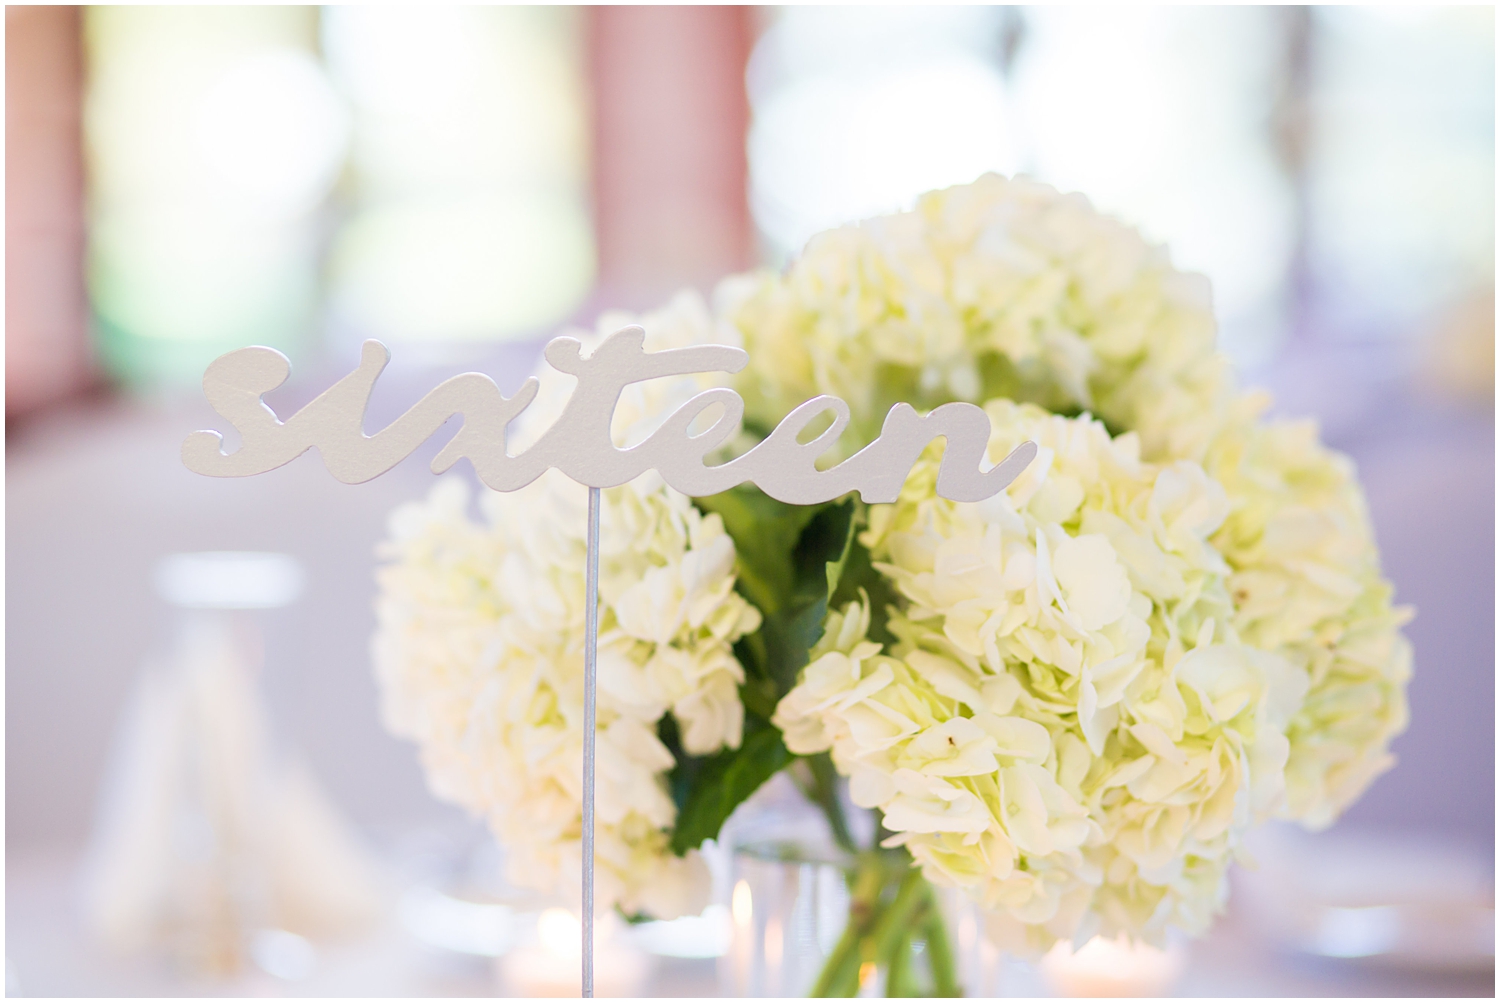 white hydrangeas and white table number wedding day reception details